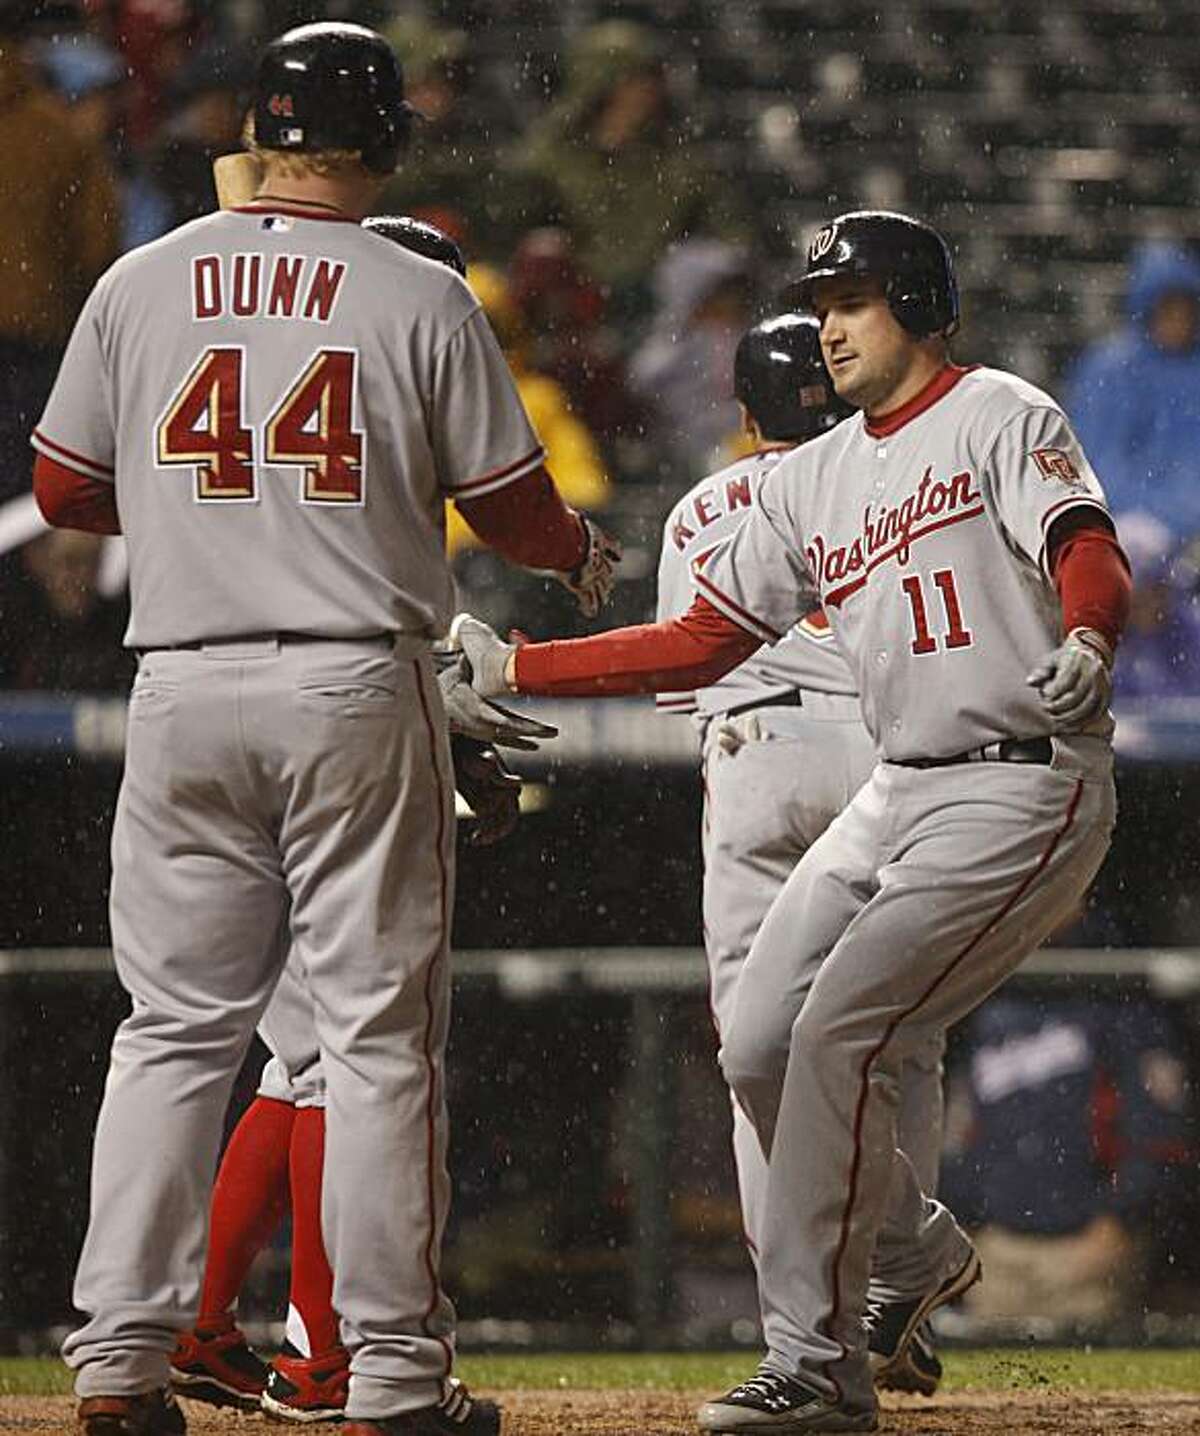 Washington Nationals' Adam Dunn, left, congratulates teammate Ryan Zimmerman as he crosses home plate after hitting a three-run home run against the Colorado Rockies in the fifth inning of a baseball game in Denver on Thursday, May 13, 2010.